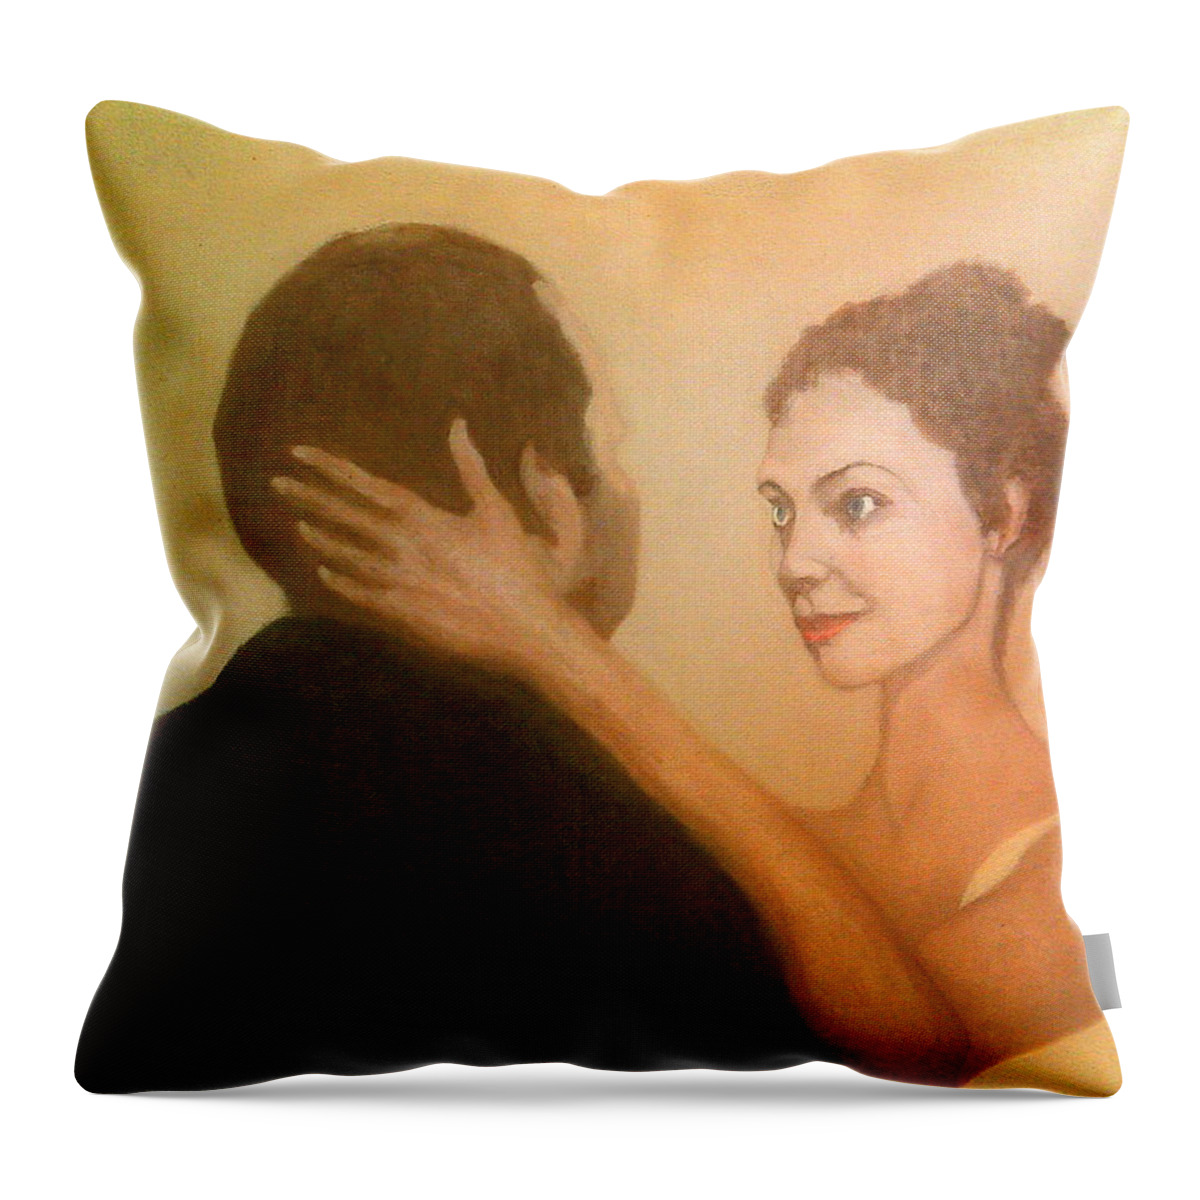 Young Brunette Woman Earnest Look Hand Back On Head Man Back Arm Bicep Throw Pillow featuring the painting An Earnest Look by Peter Gartner